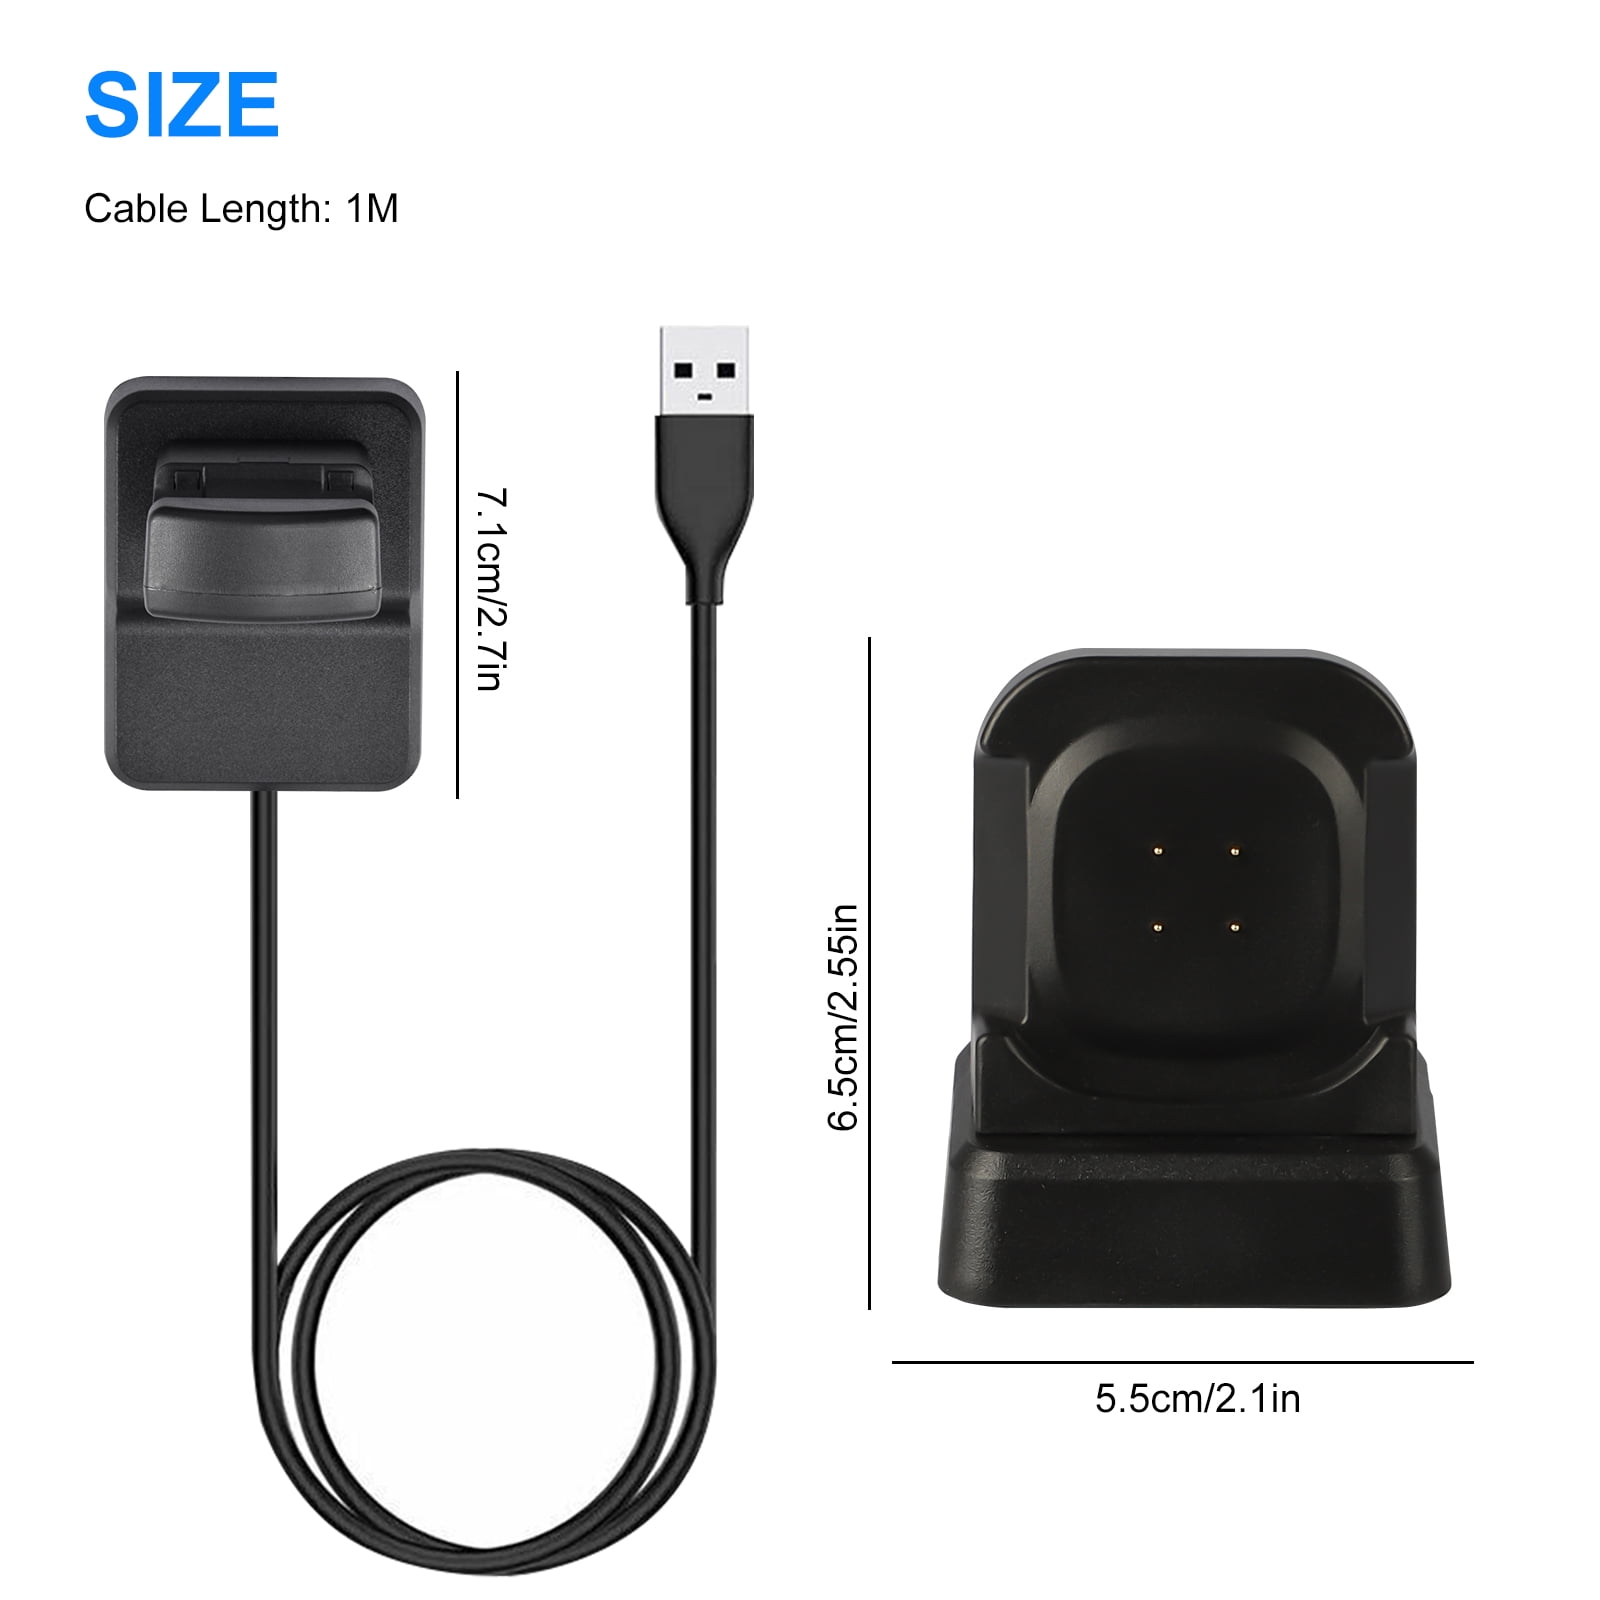 pence solidaritet mister temperamentet Charger Fit for Fitbit Sense Watch, EEEkit Replacement USB Charging Cable  Cord Stand Compatible with Fitbit Sense Versa 3 Smart Watch - Walmart.com